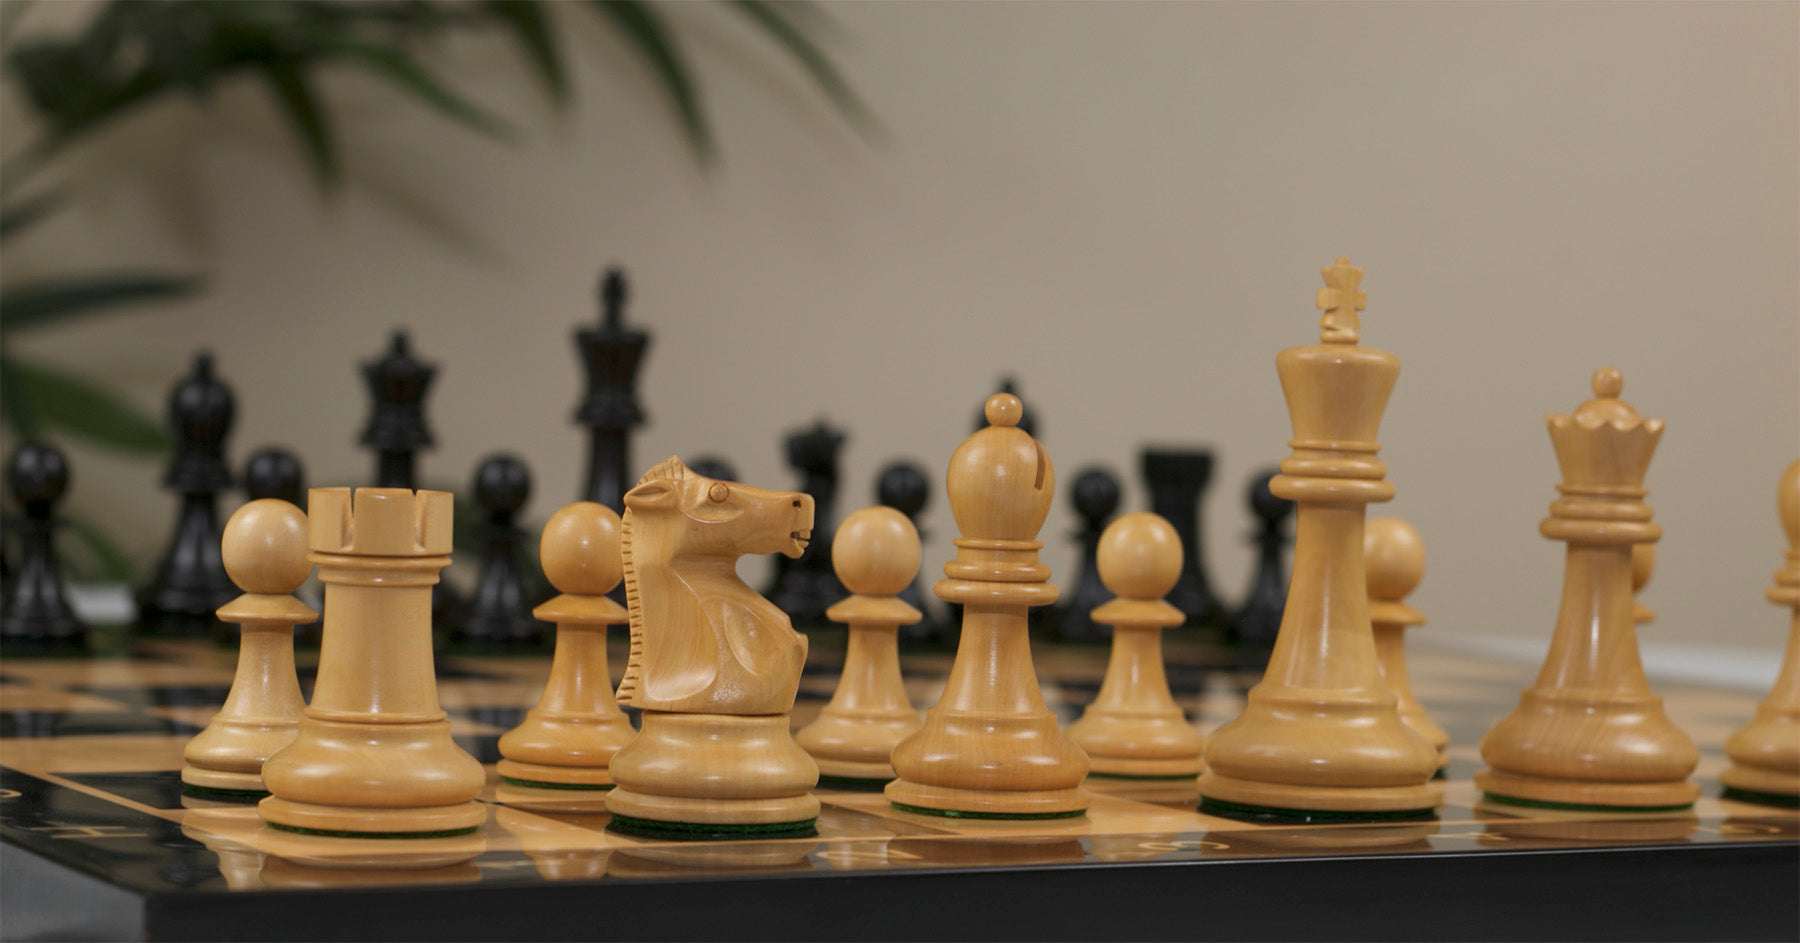 1972 FIDE Commemorative Chess Set – World Chess Hall of Fame